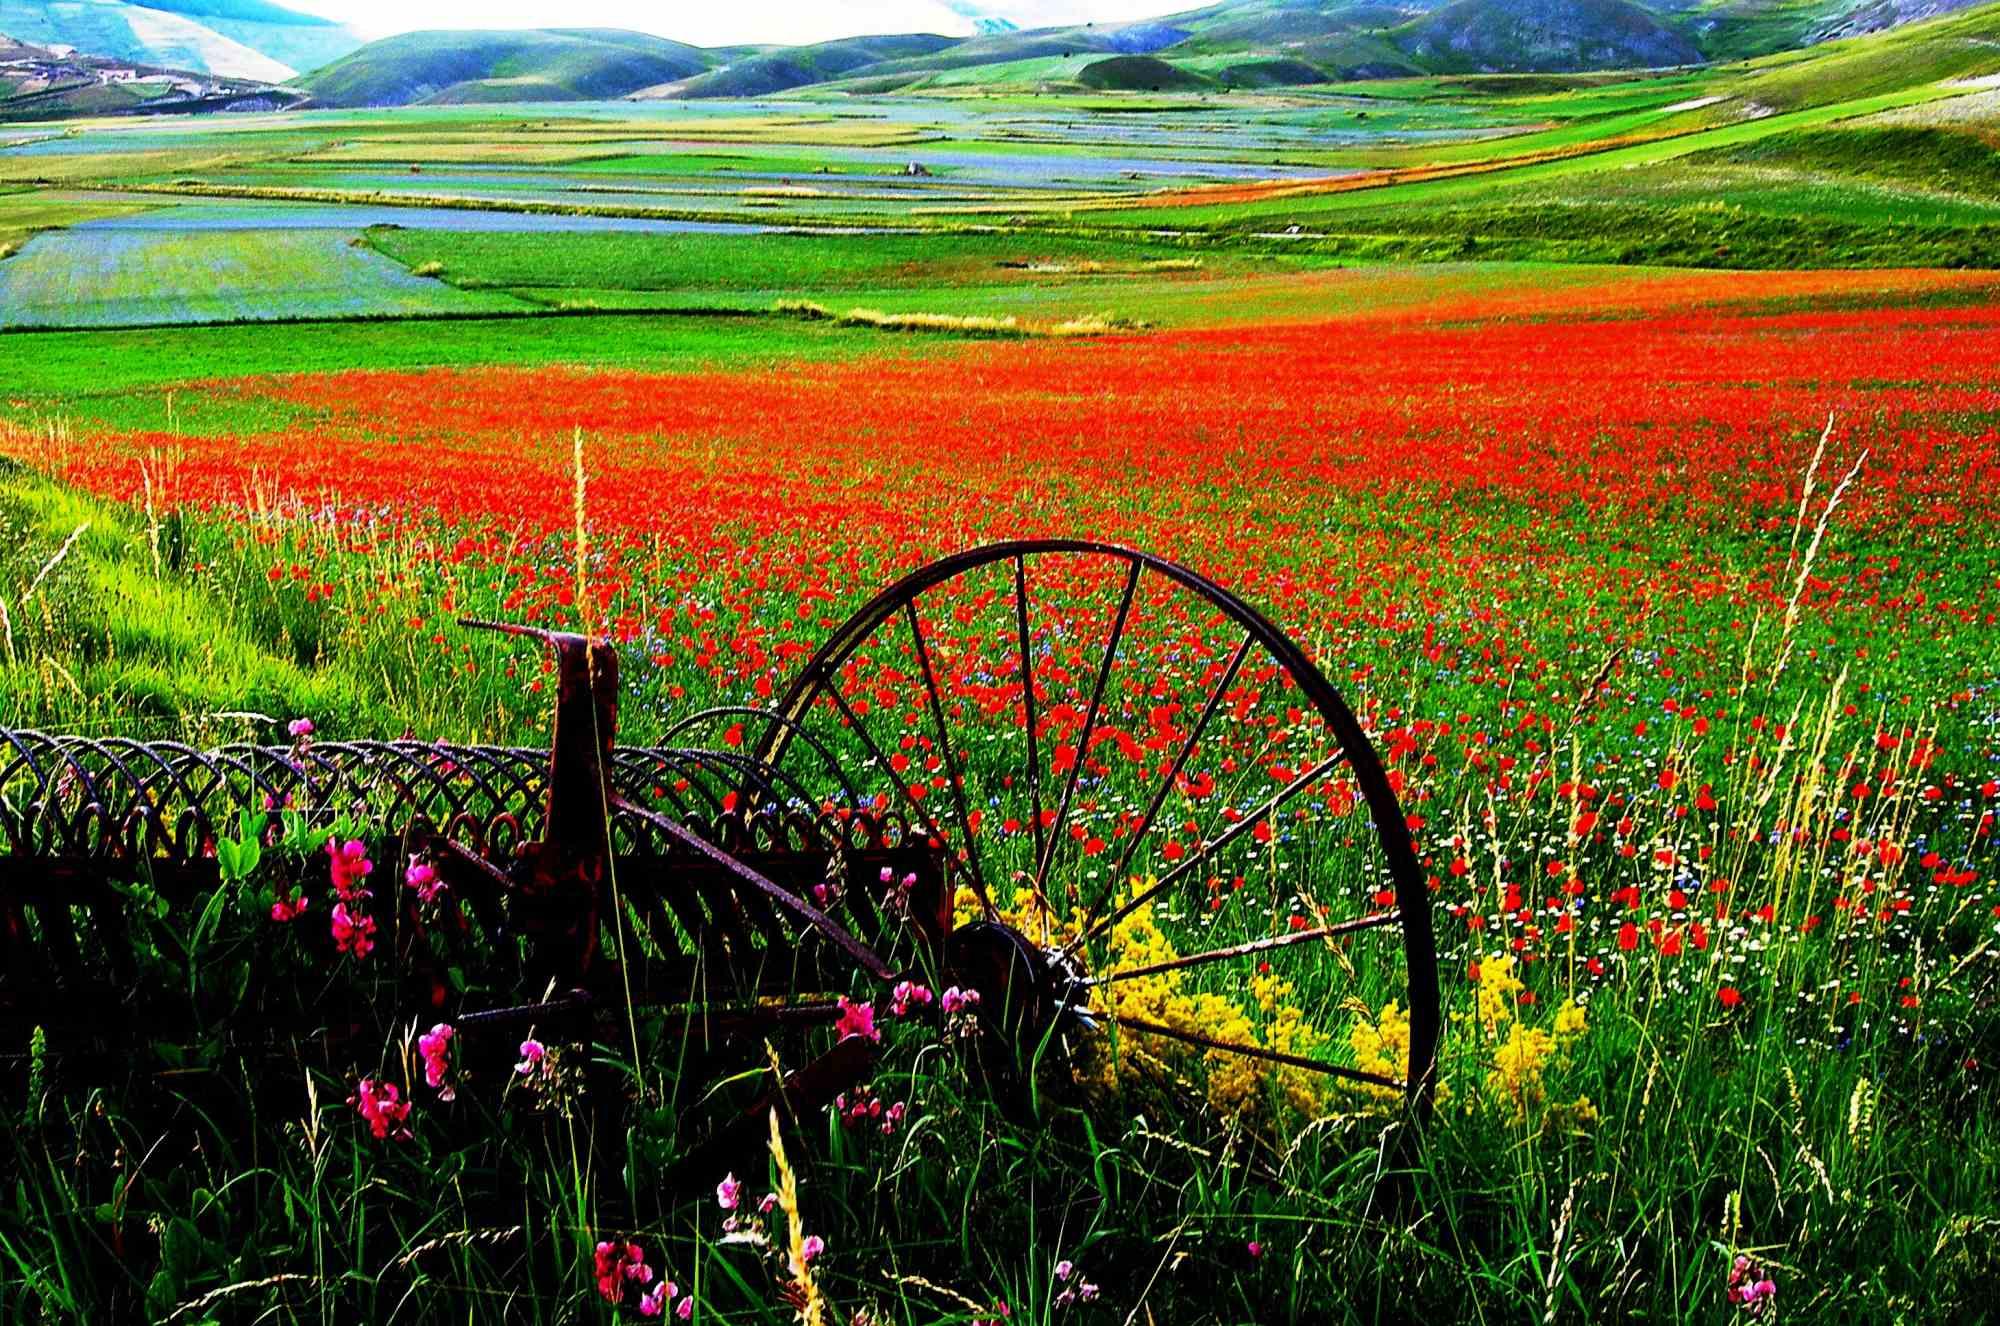 The old is one of the best photo on canvas realized by Giuseppe Marani in 2010.

Always passionate about landscapes and photography, the artist then devoted himself to landscaping. He greatly admires the beauty of the landscapes of Castelluccio di